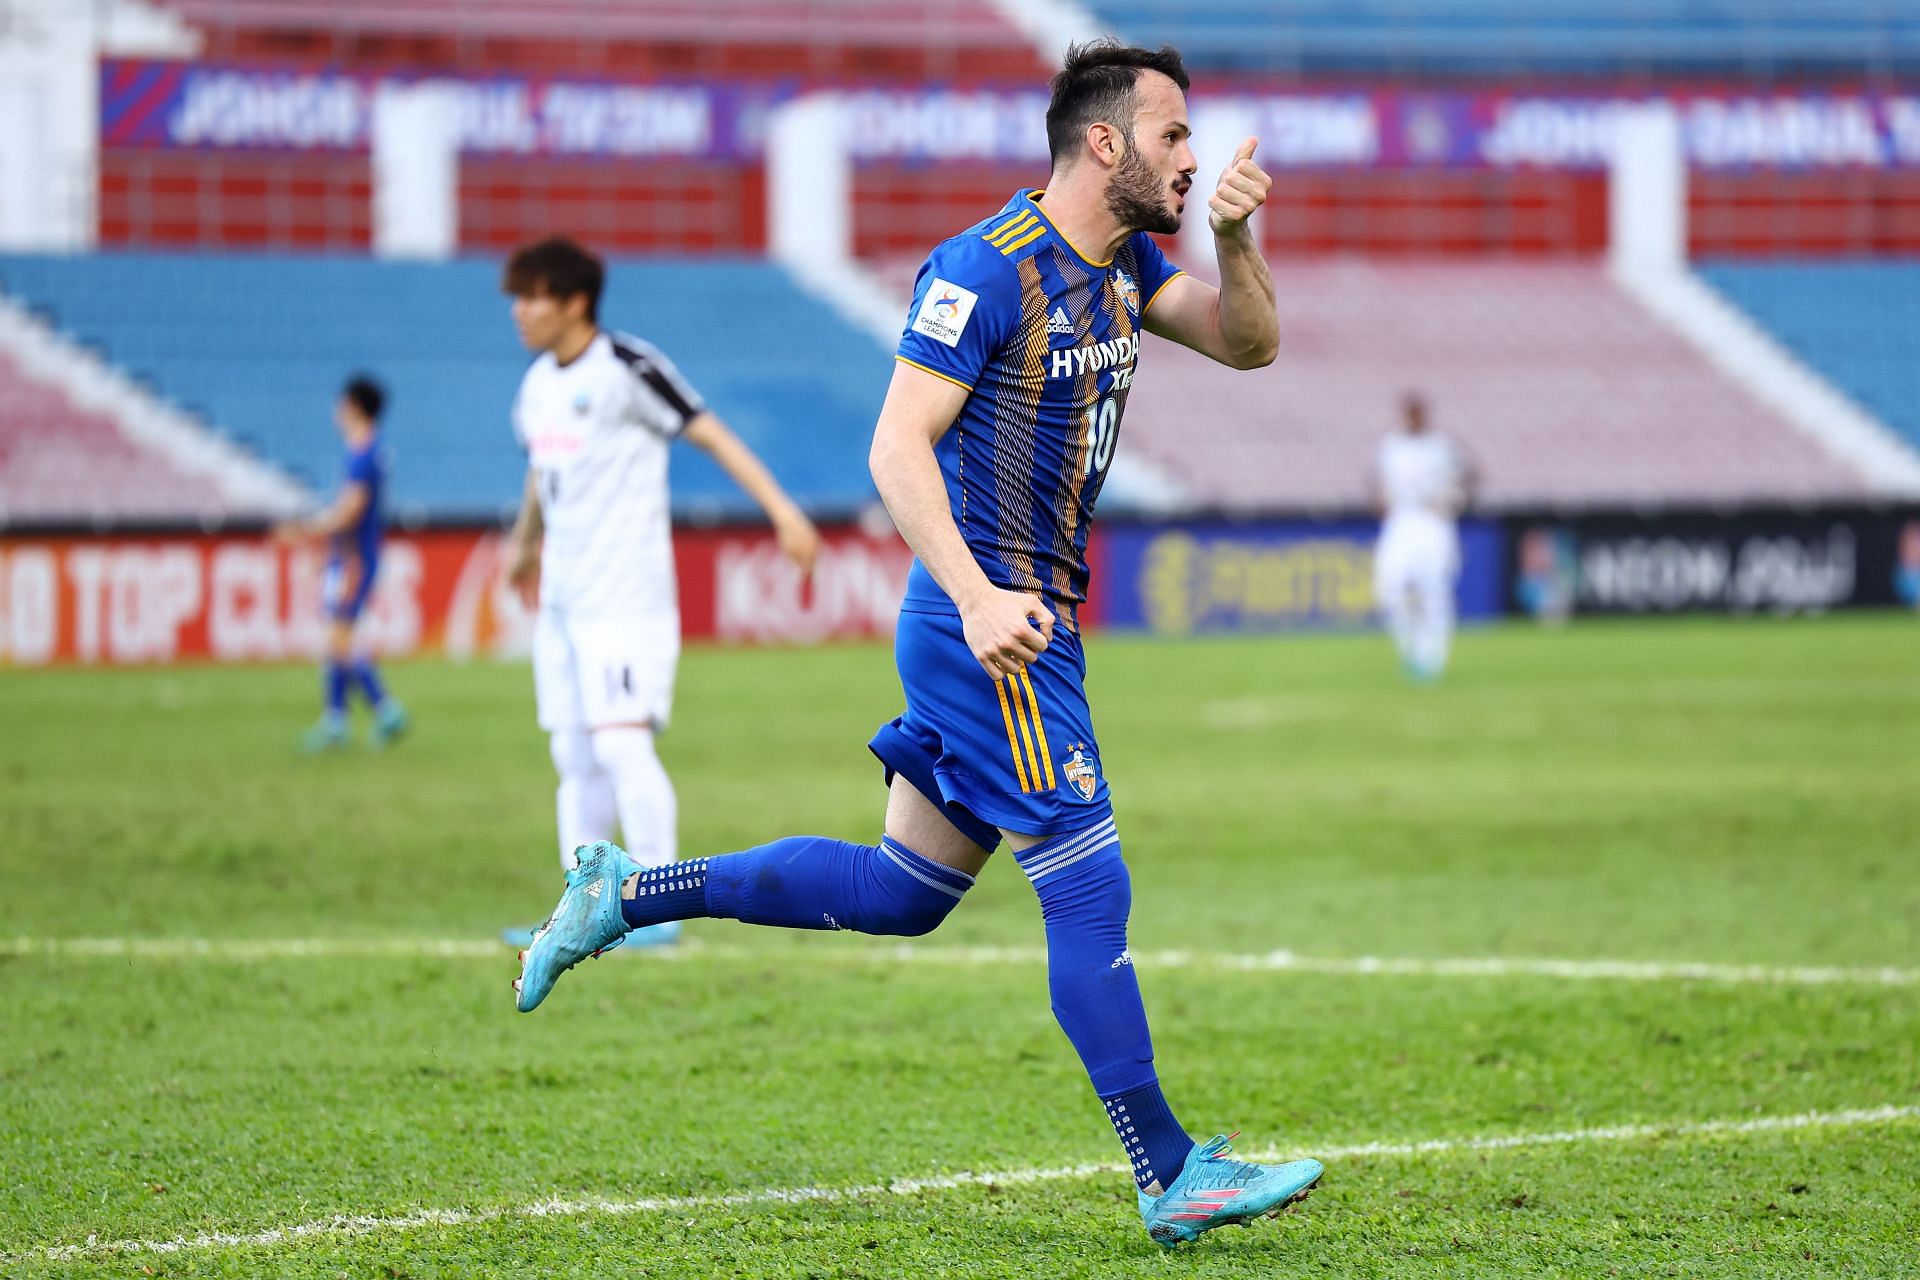 Ulsan Hyundai will square off against Pohang Steelers in their upcoming K League 1 fixture